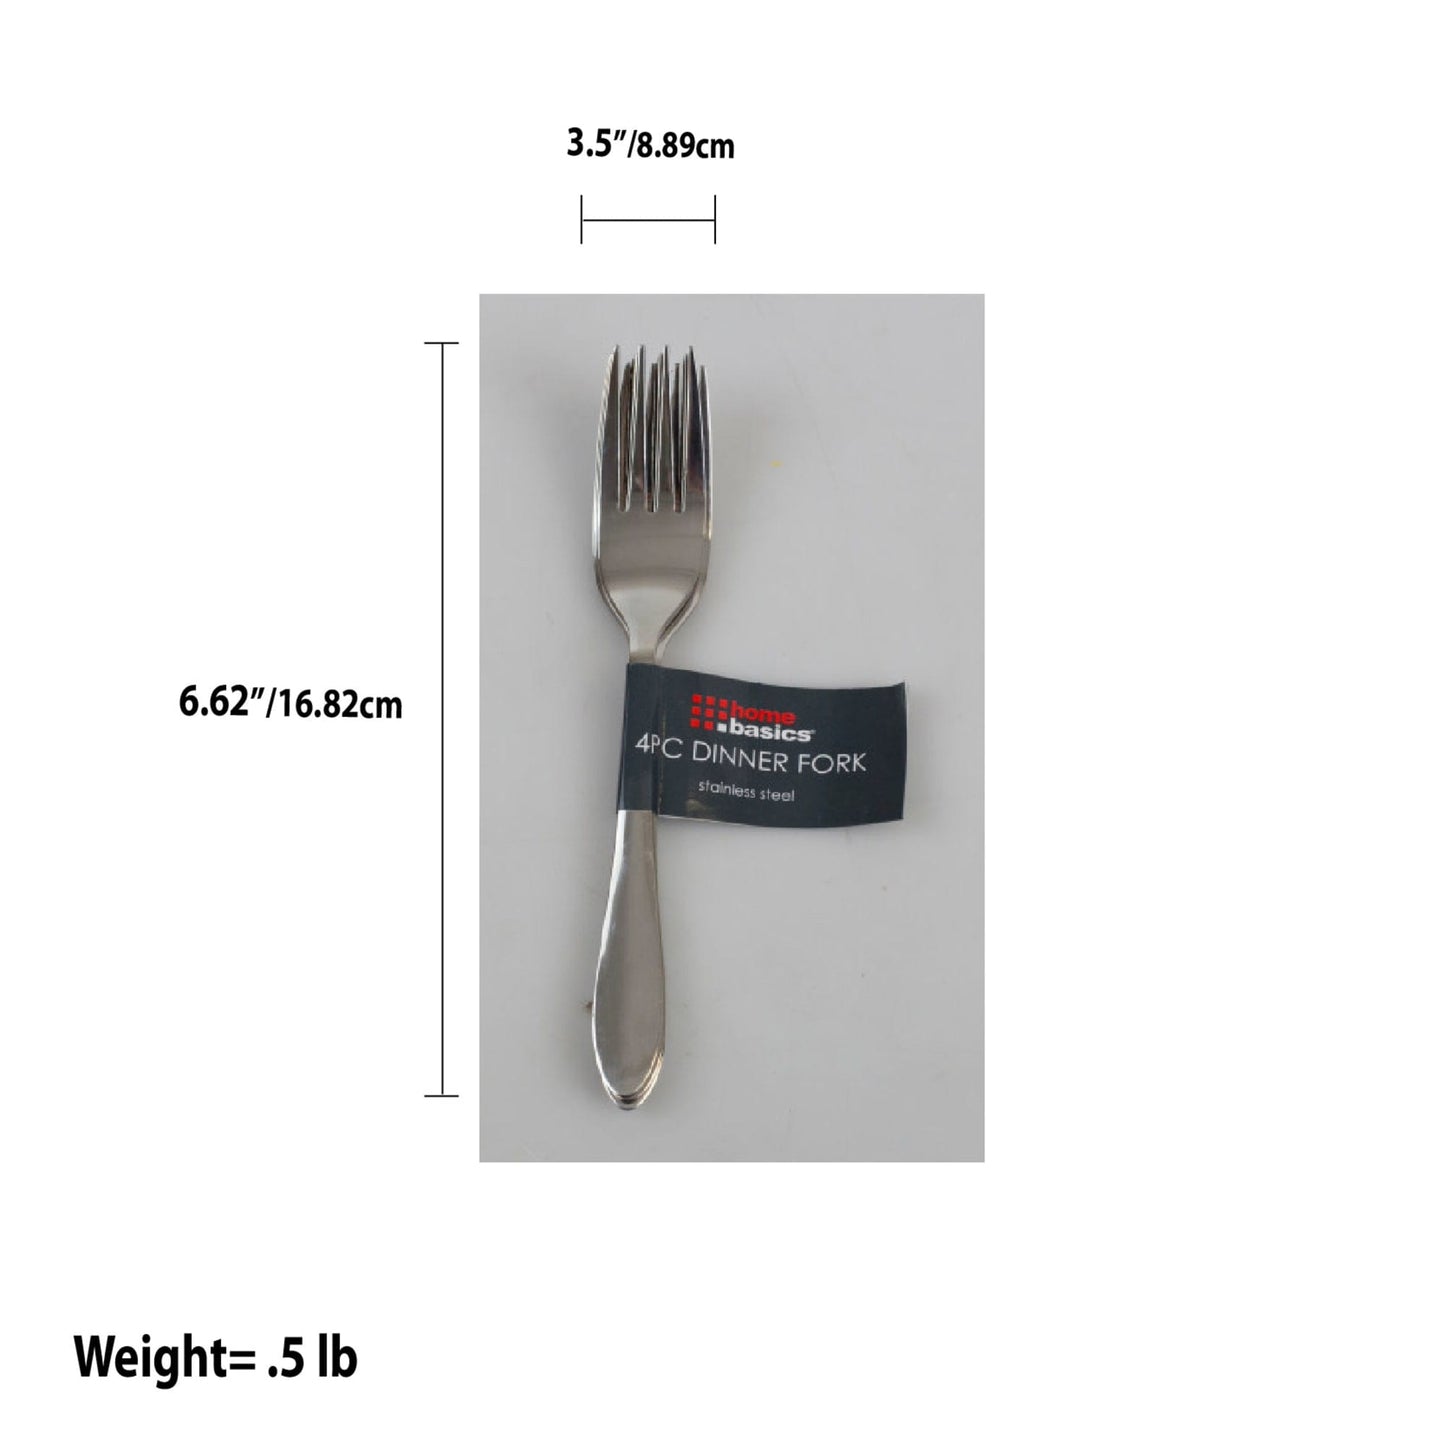 4 Piece Stainless Steel Dinner Fork, Silver